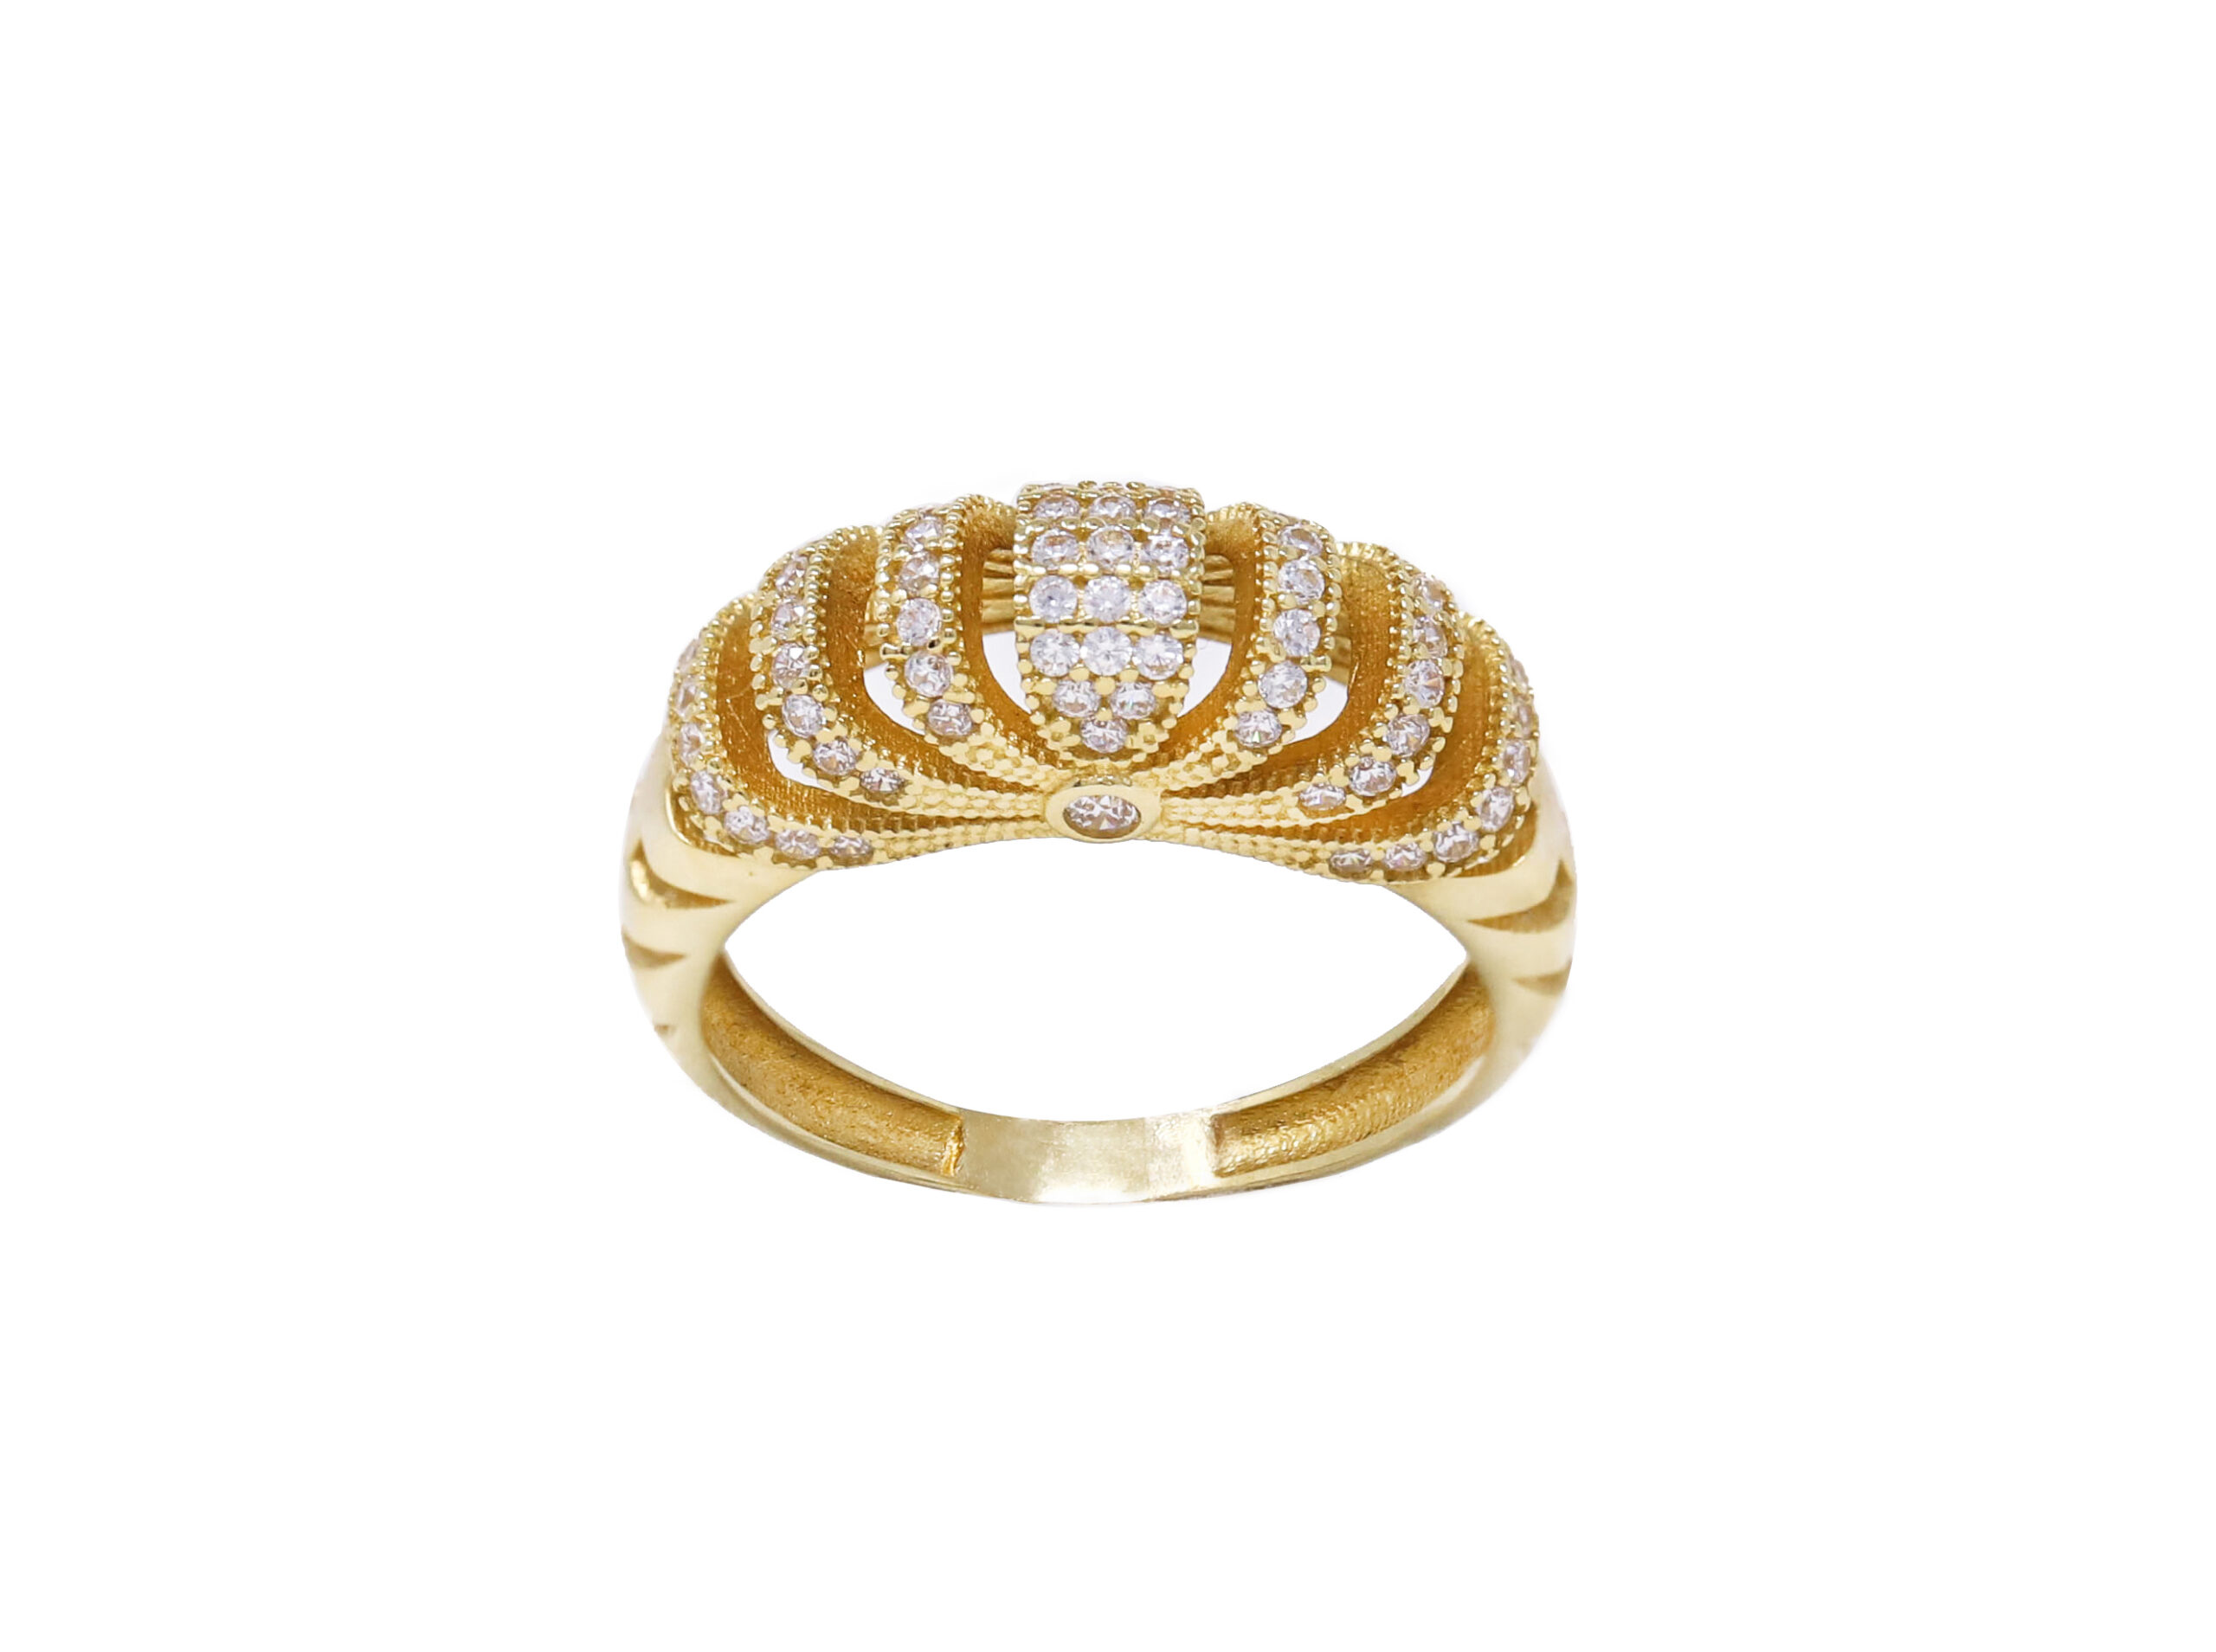 22ct Gold Bali by Purejewels has a minimal yet a fun touch to its design